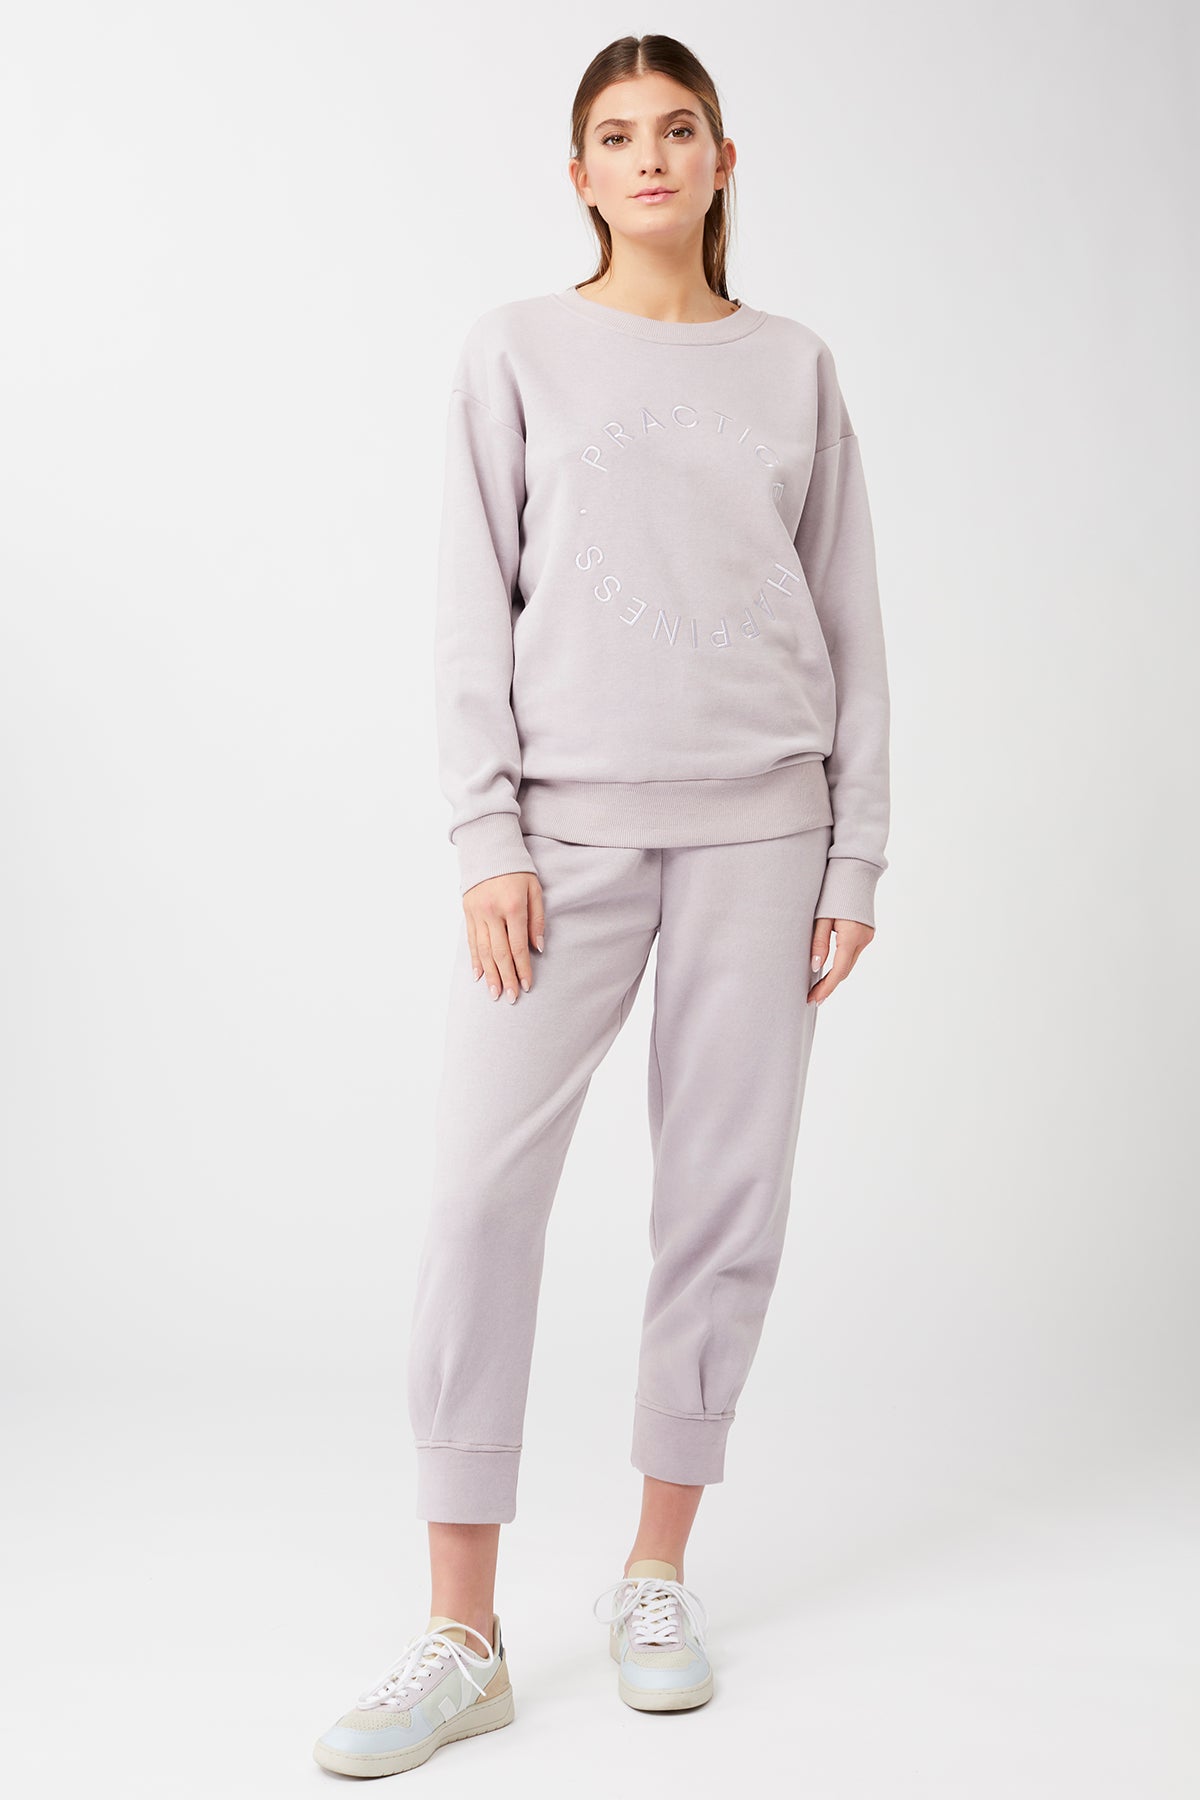 Practice Happiness Sweater + Natural Dye Track Pants (Magnolia)